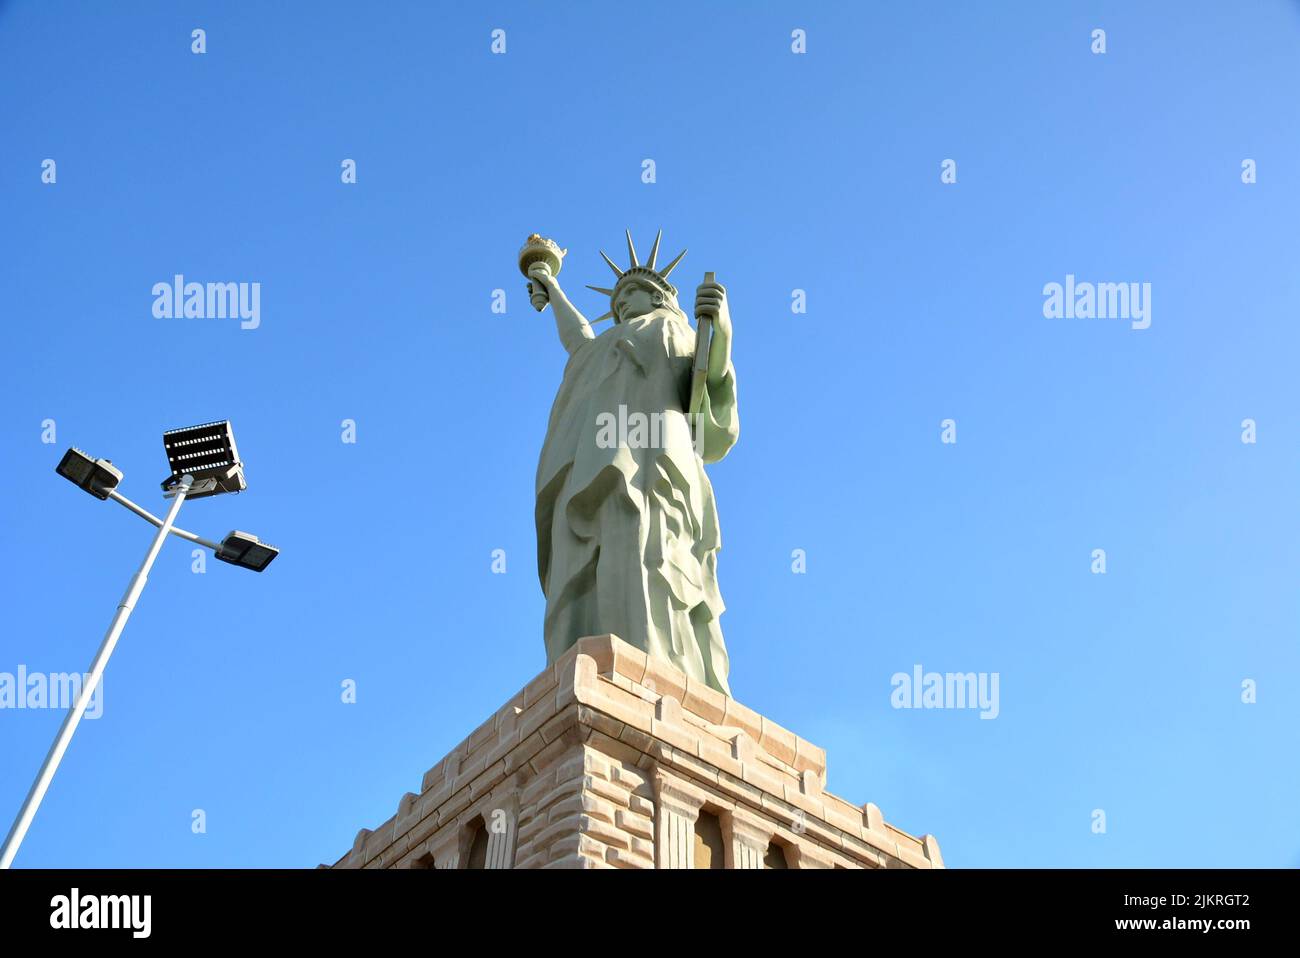 Imitation of the Statue of Liberty, on a concrete pedestal, led lamp post, blue sky in the background, Brazil, South America, bottom-up view Stock Photo